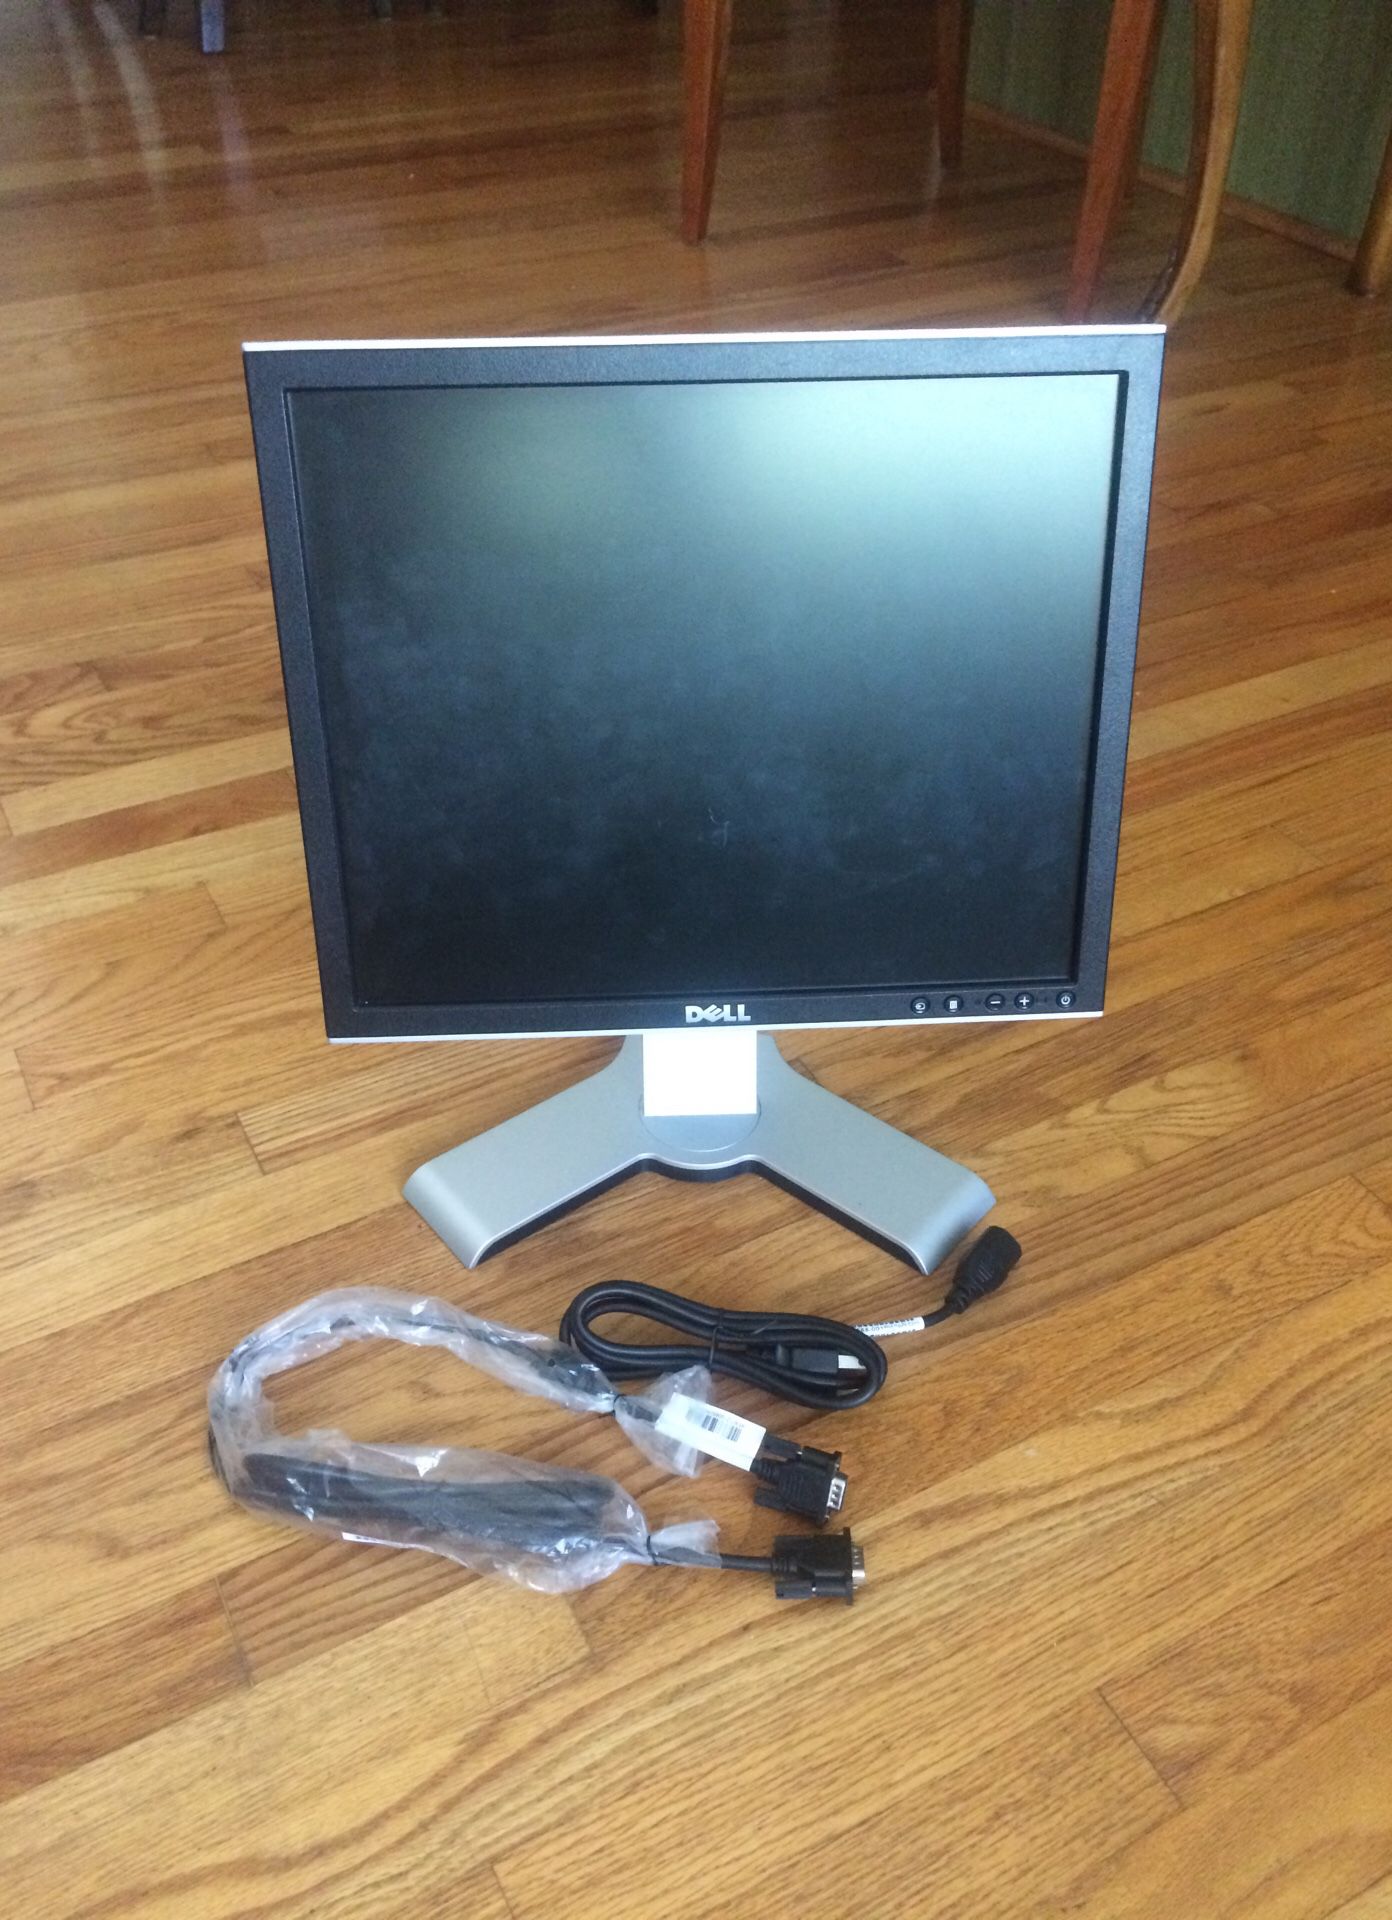 17” Dell Monitor with height adjustable stand